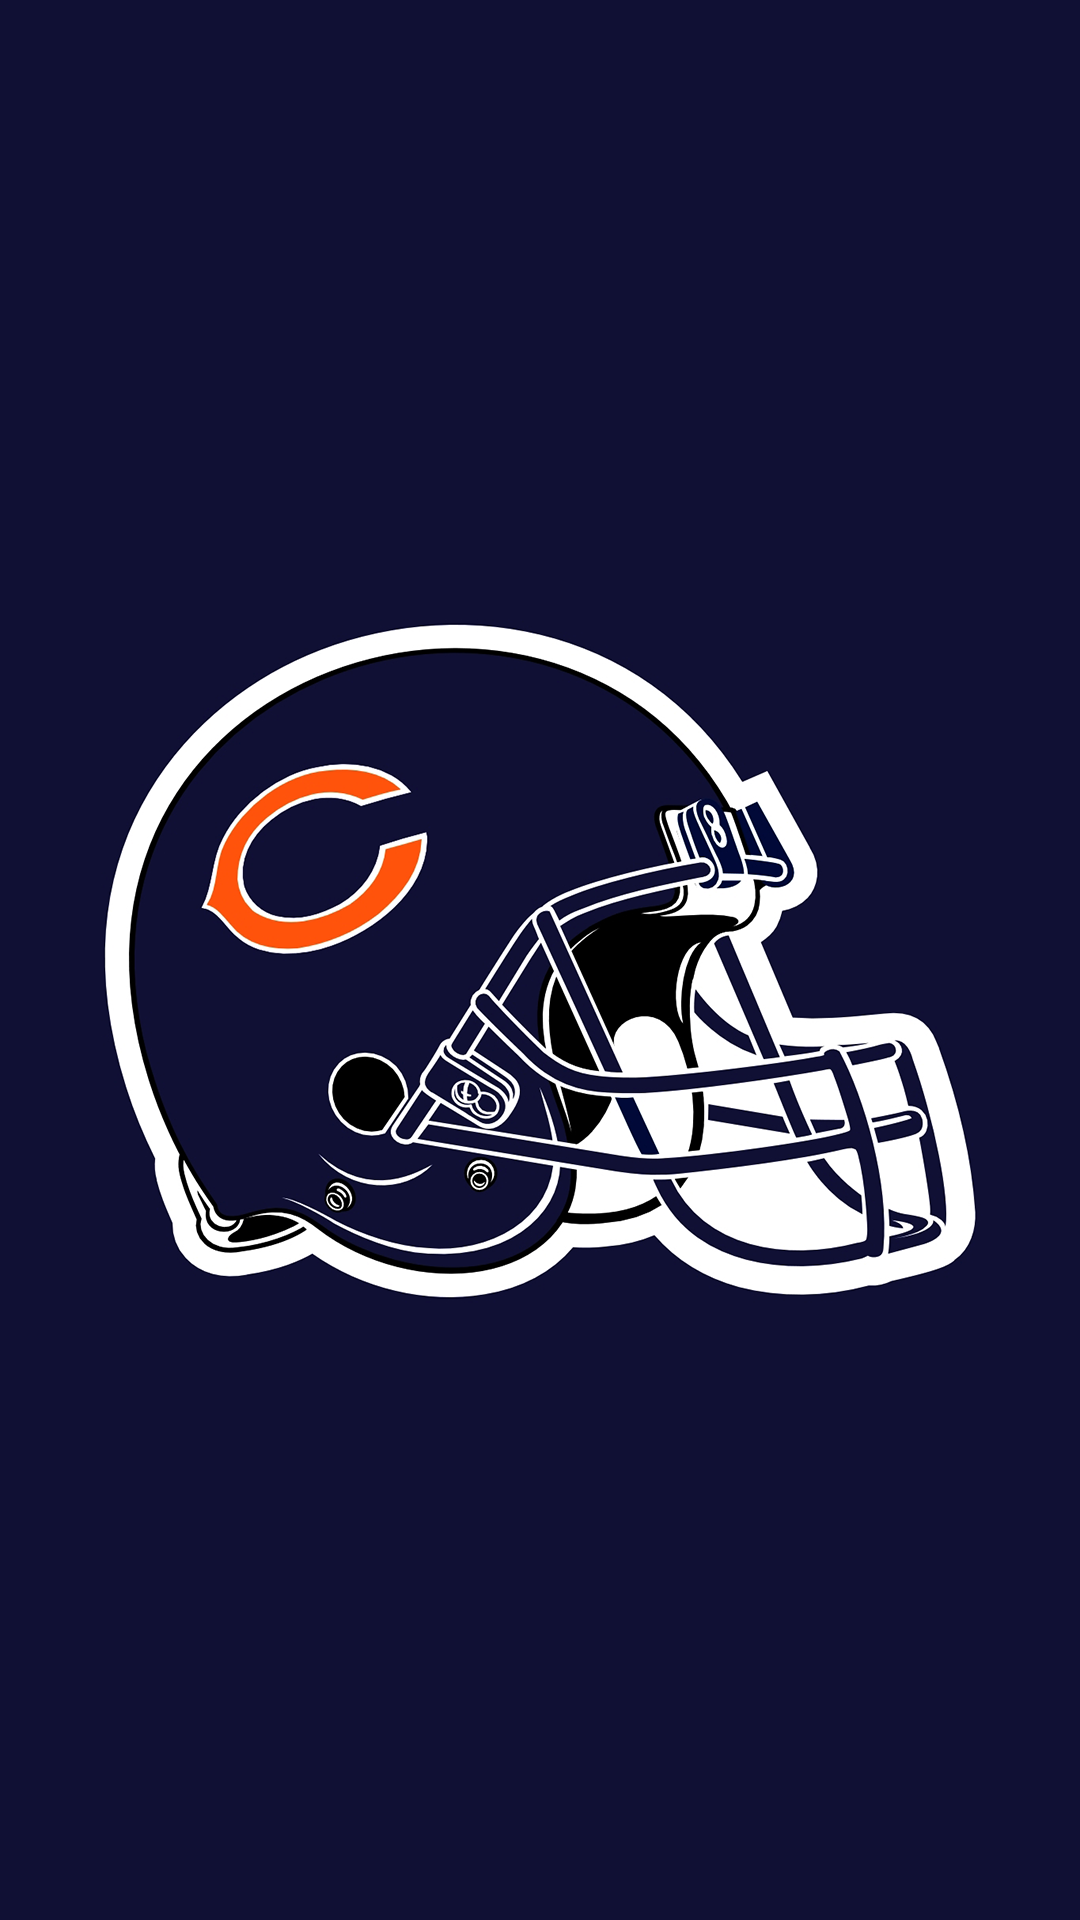 Chicago Bears Logo Wallpapers  Top 22 Best Chicago Bears Logo Wallpapers   HQ 